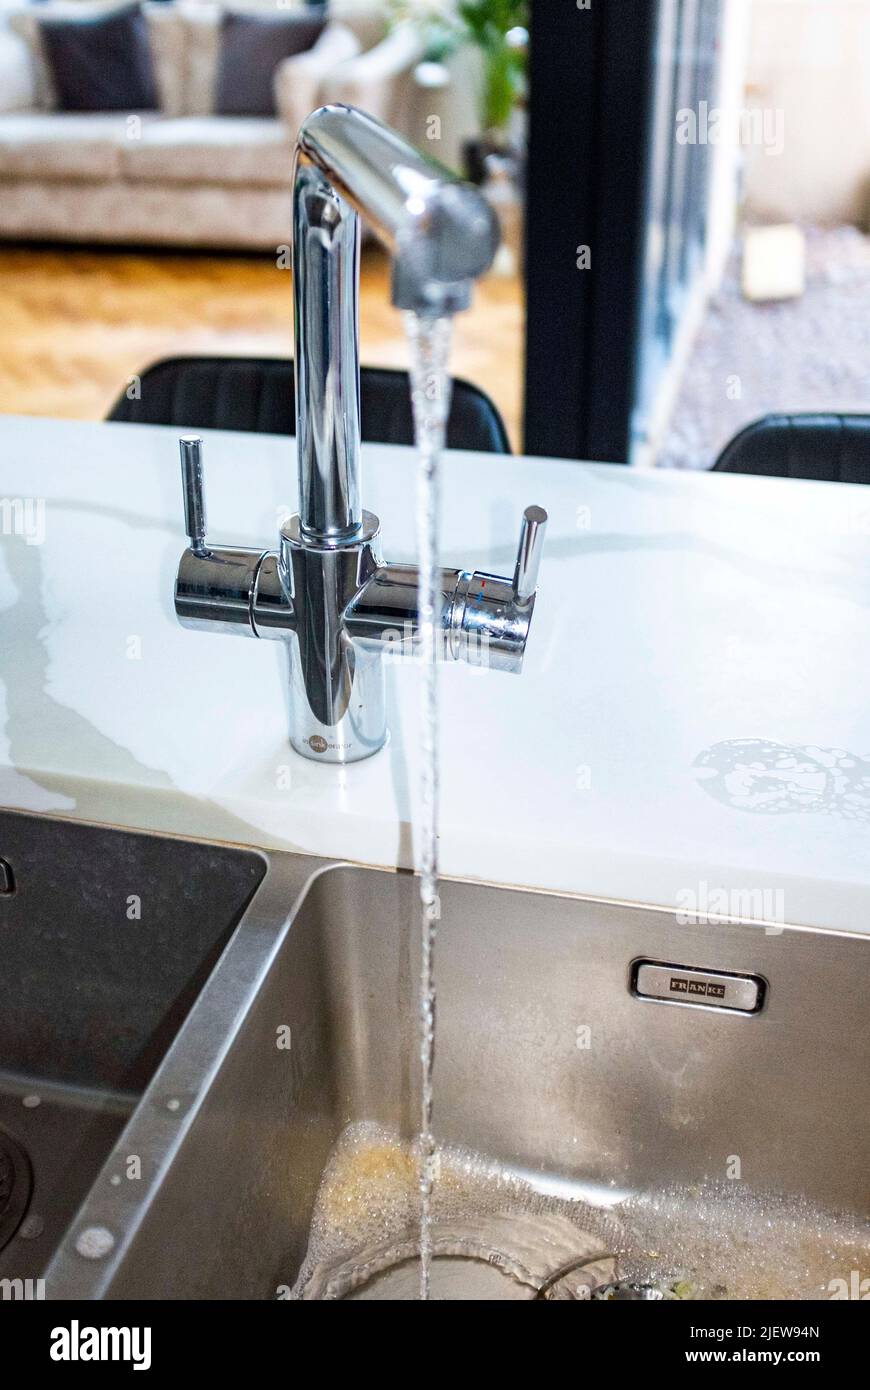 Kitchen unit sink mixer tap with running water Stock Photo